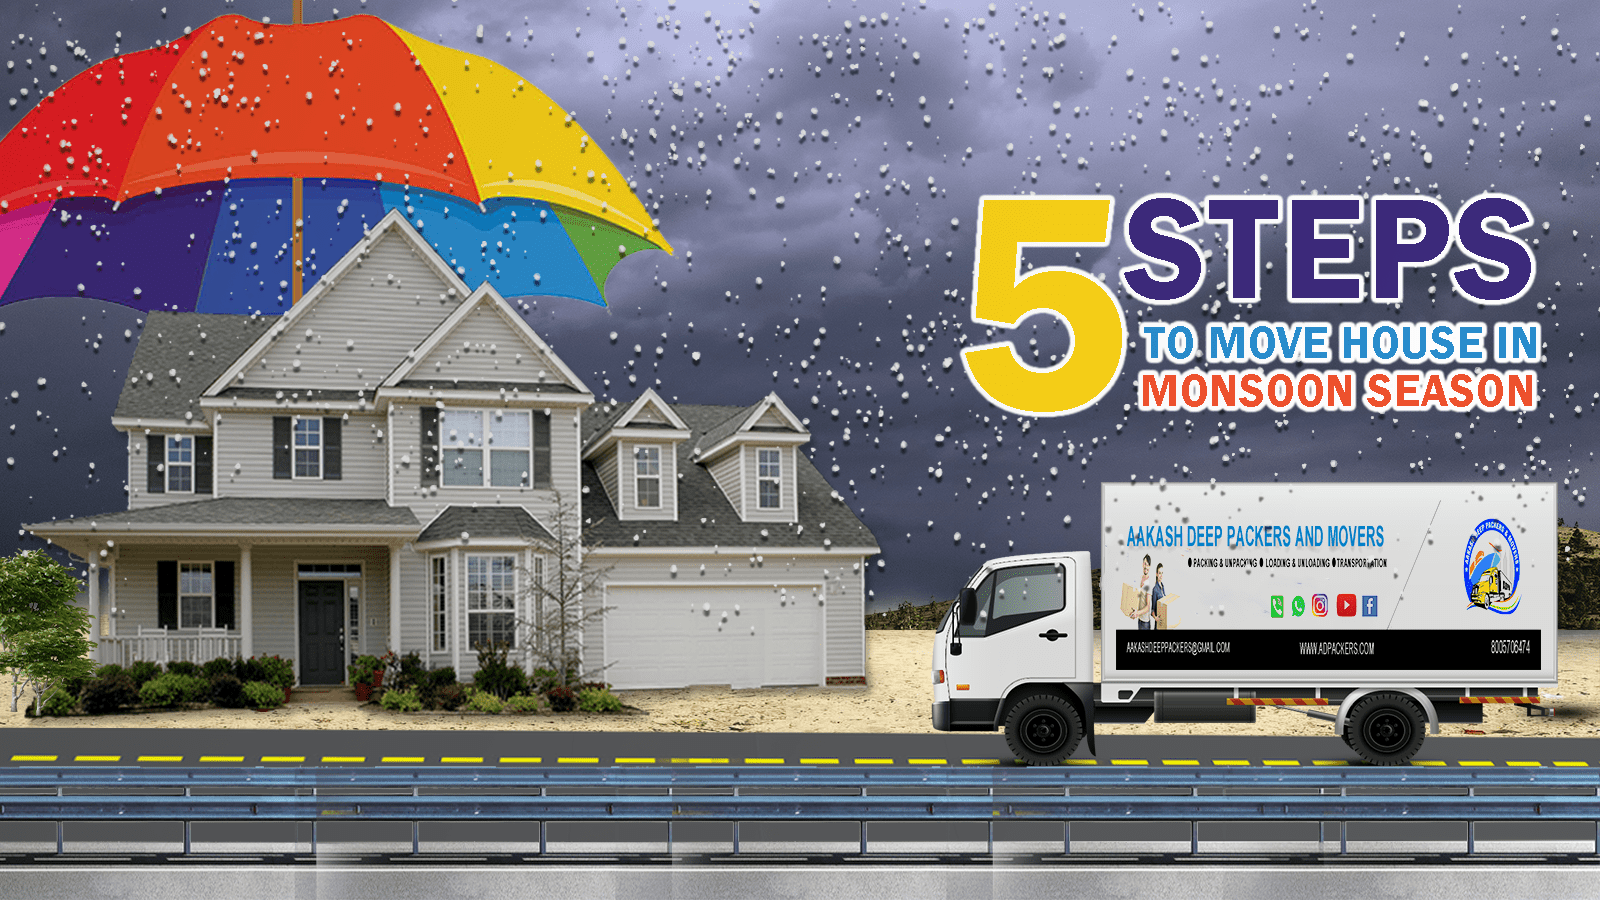 5 steps to Move house in Monsoon Season